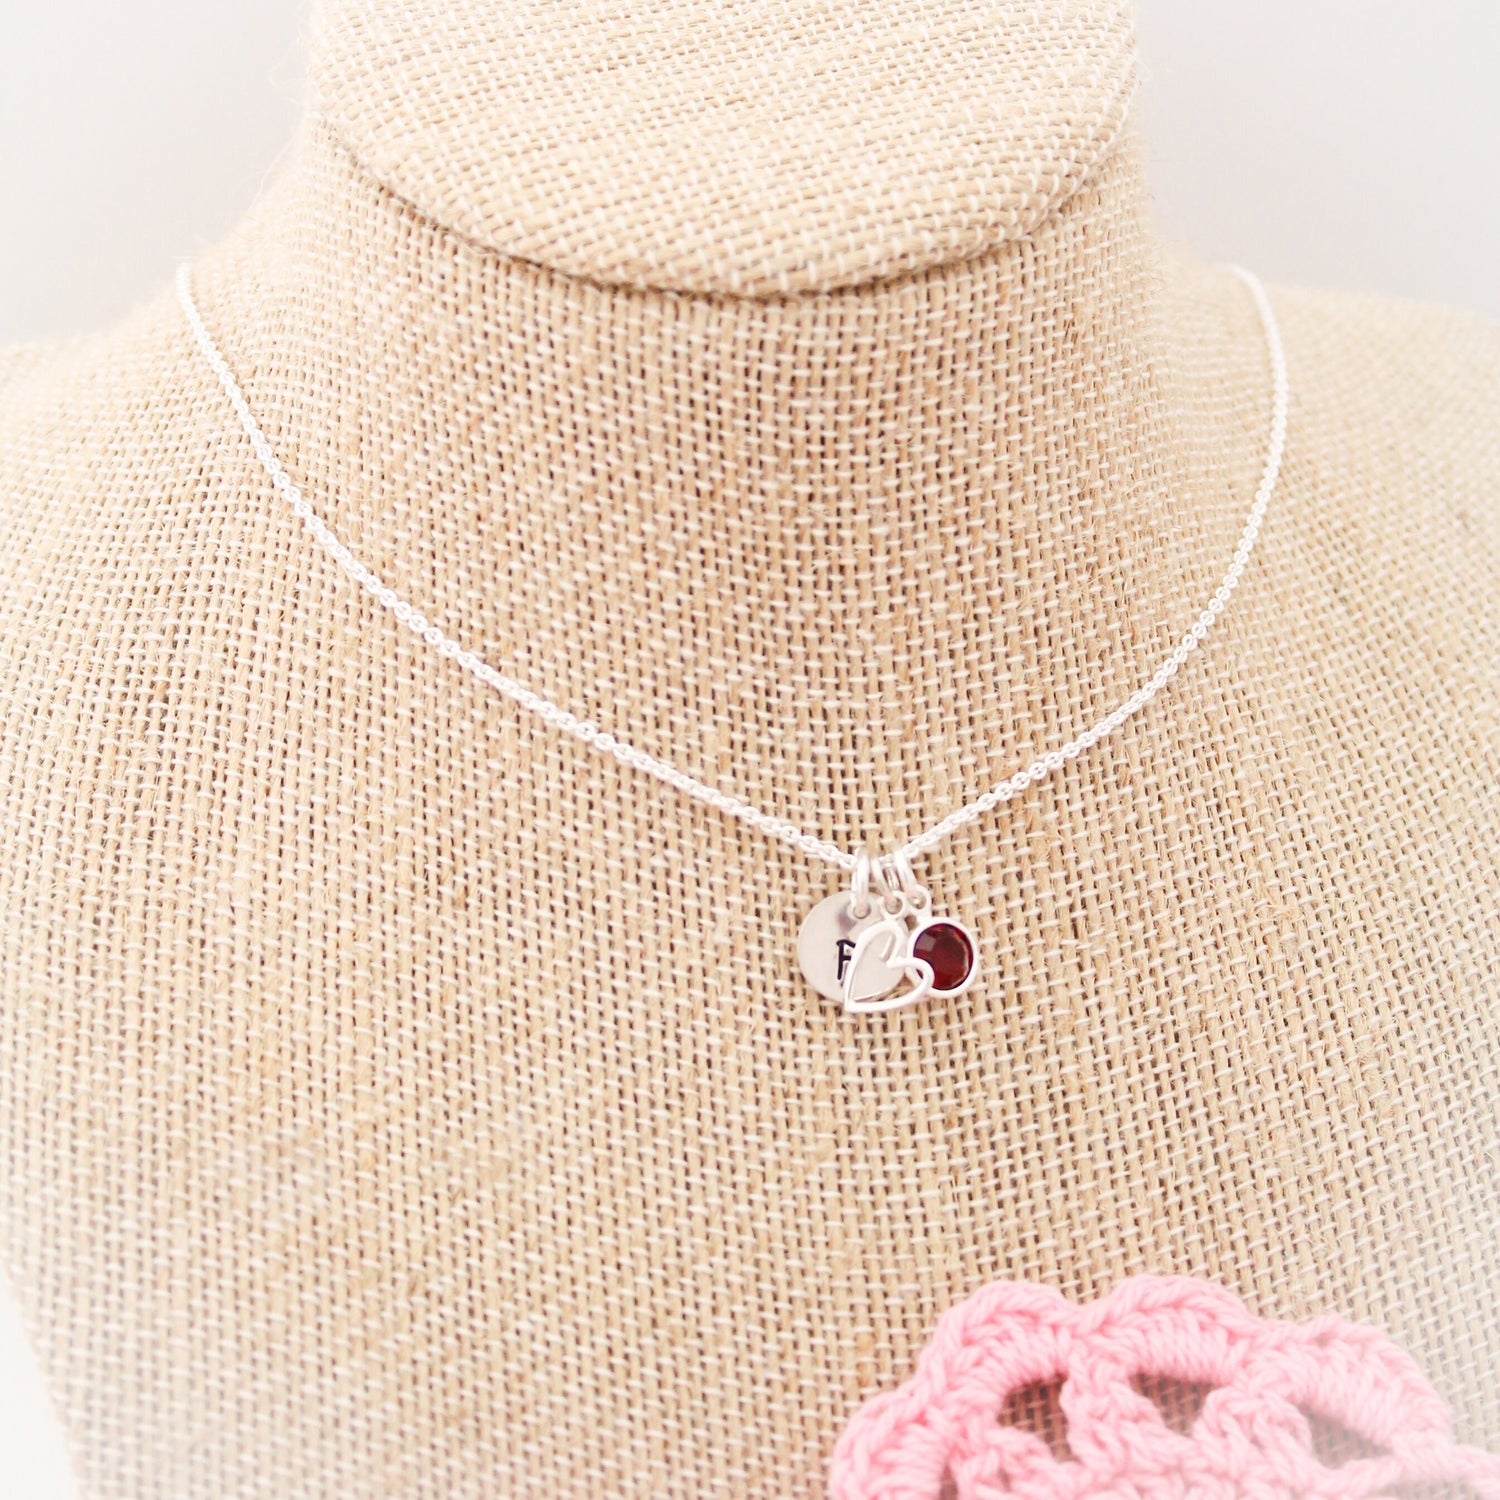 Tiny Initial and Heart Necklace in Sterling Silver Hand Stamped Personalized Jewelry